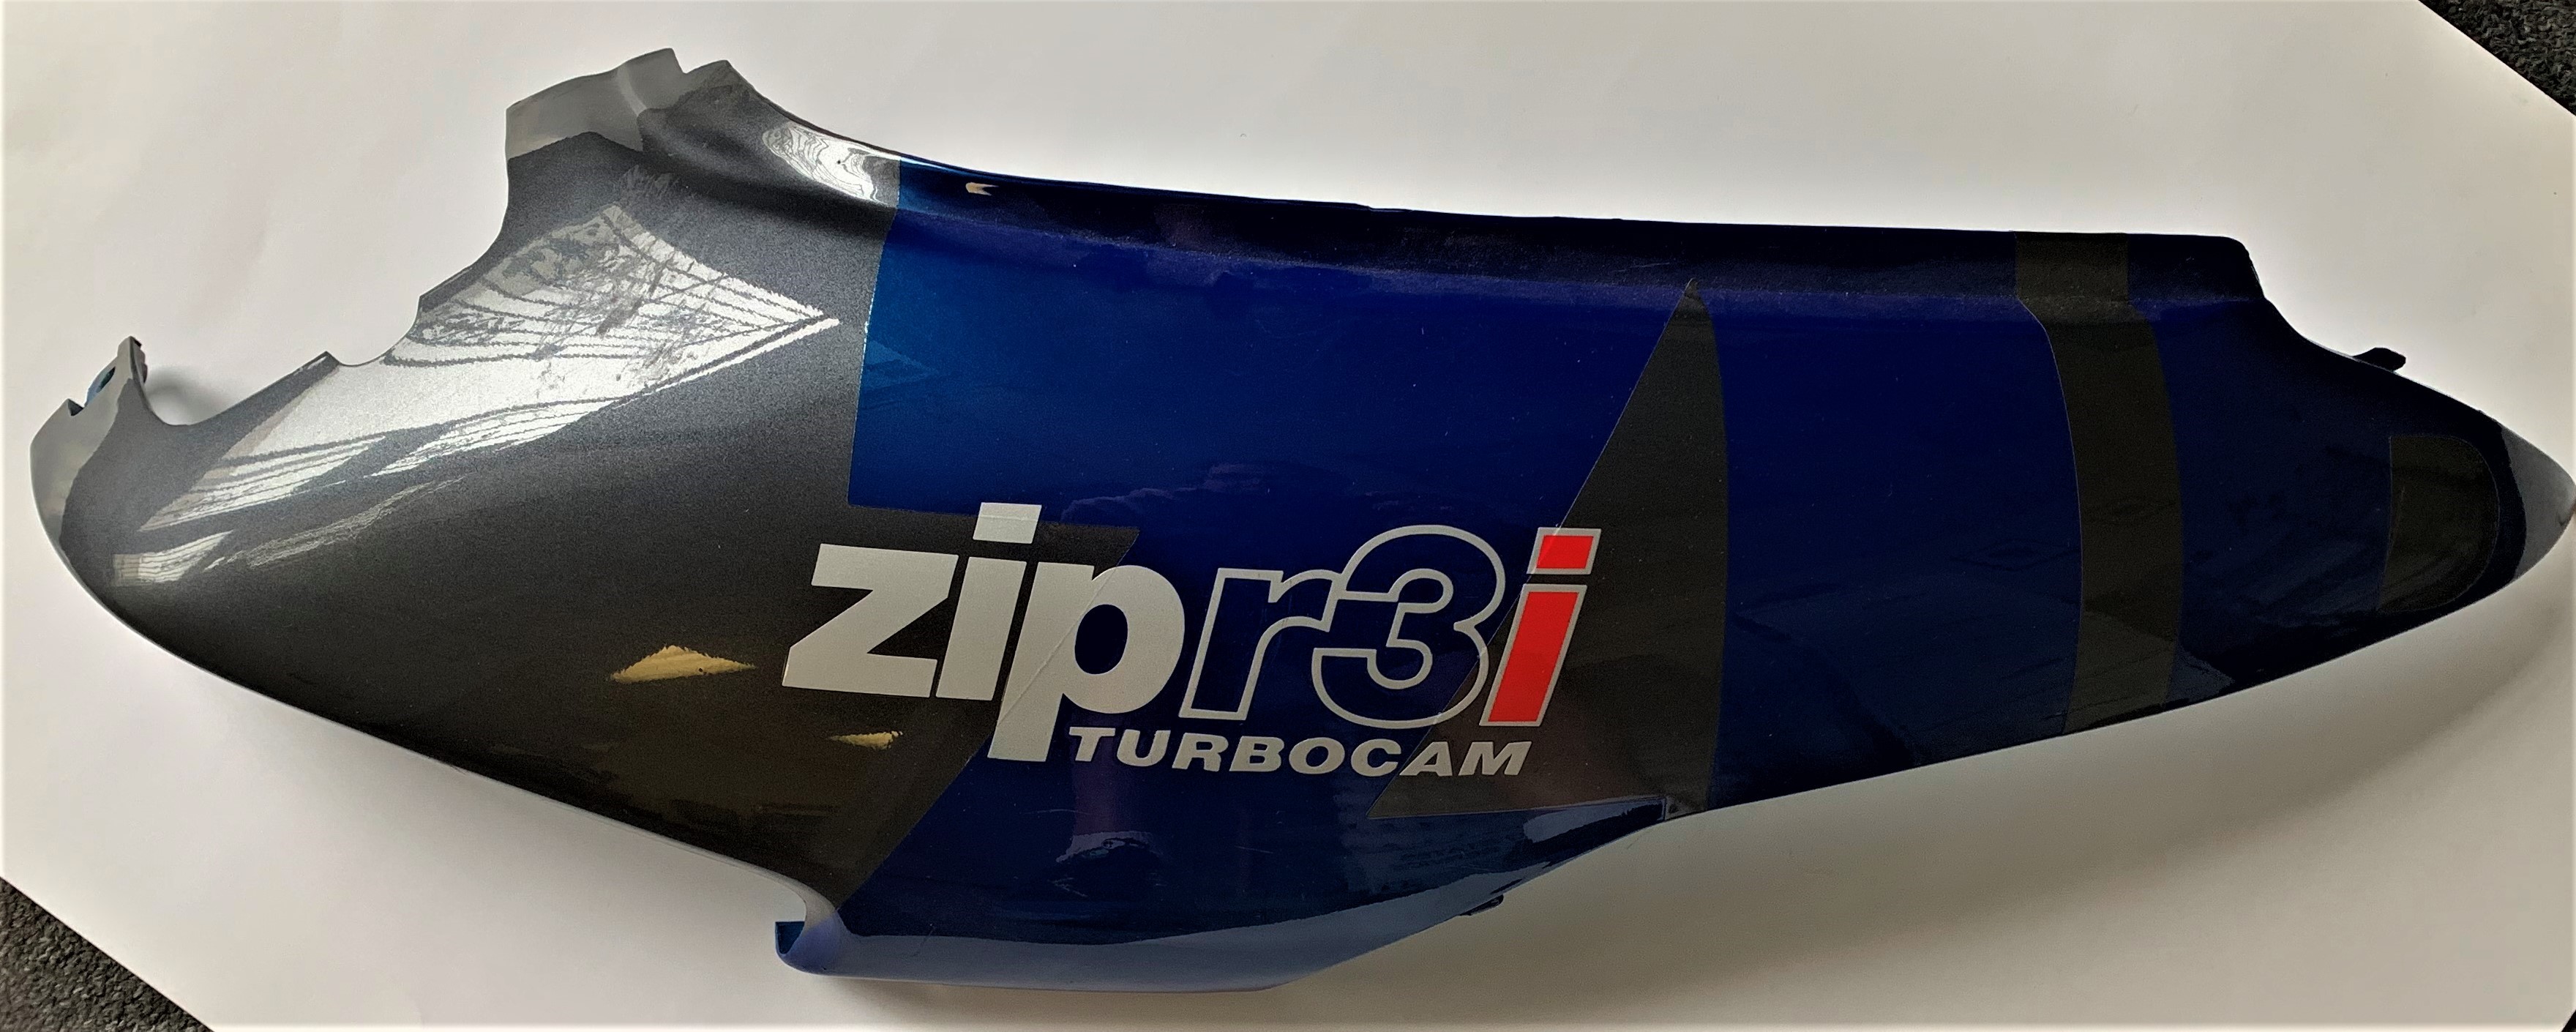 Right Rear Body Panel Zipr3i Scooter-494